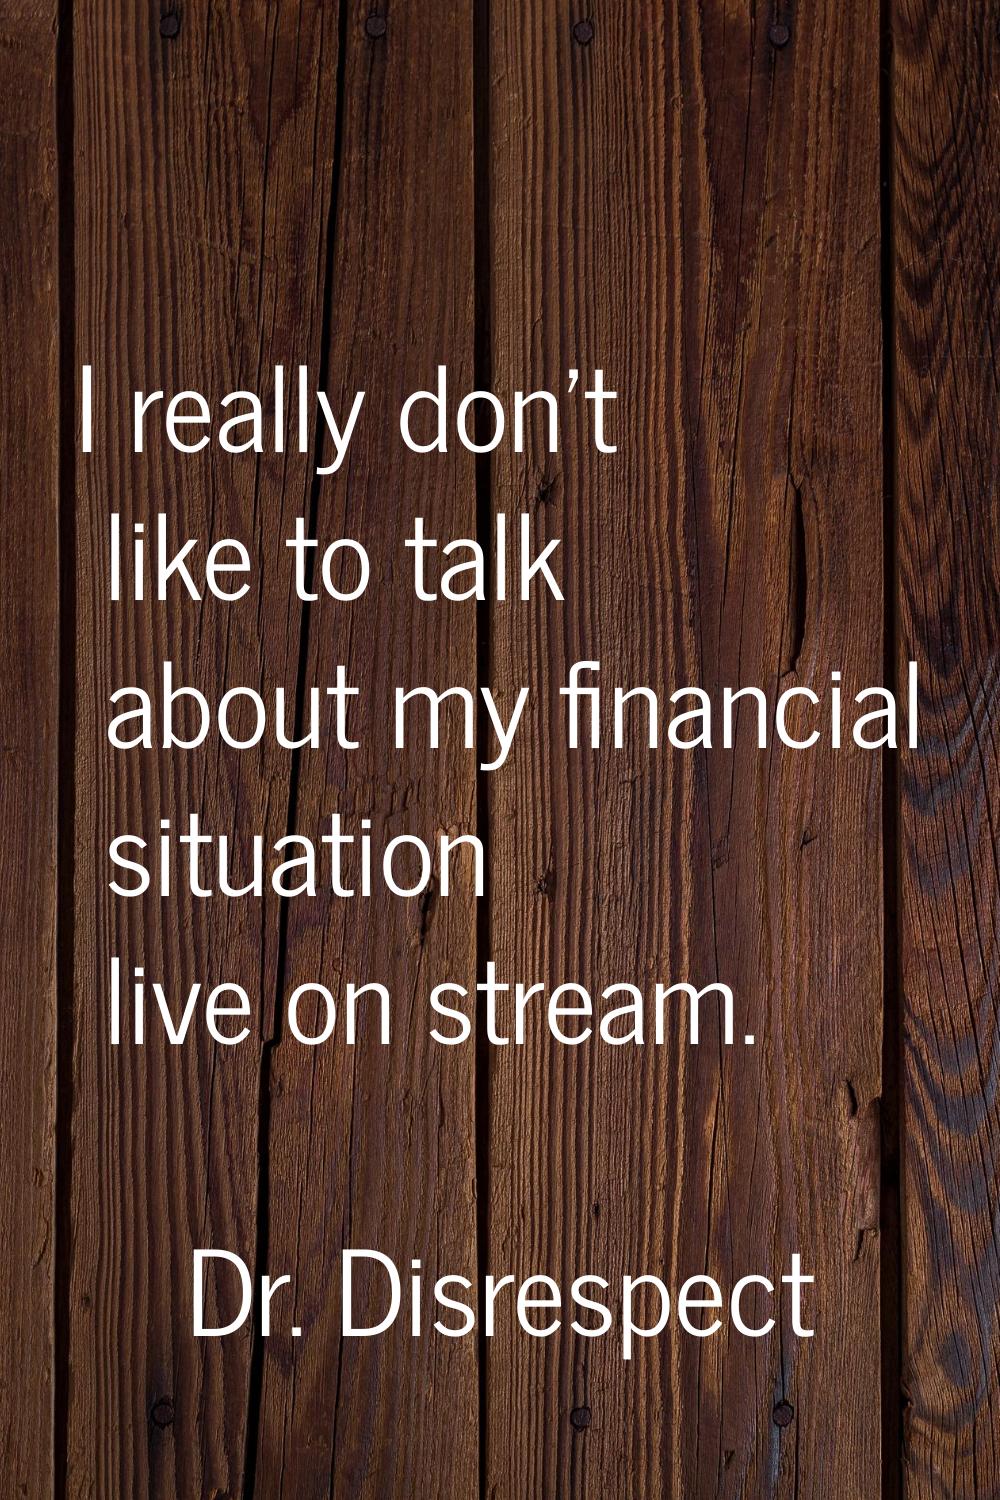 I really don't like to talk about my financial situation live on stream.